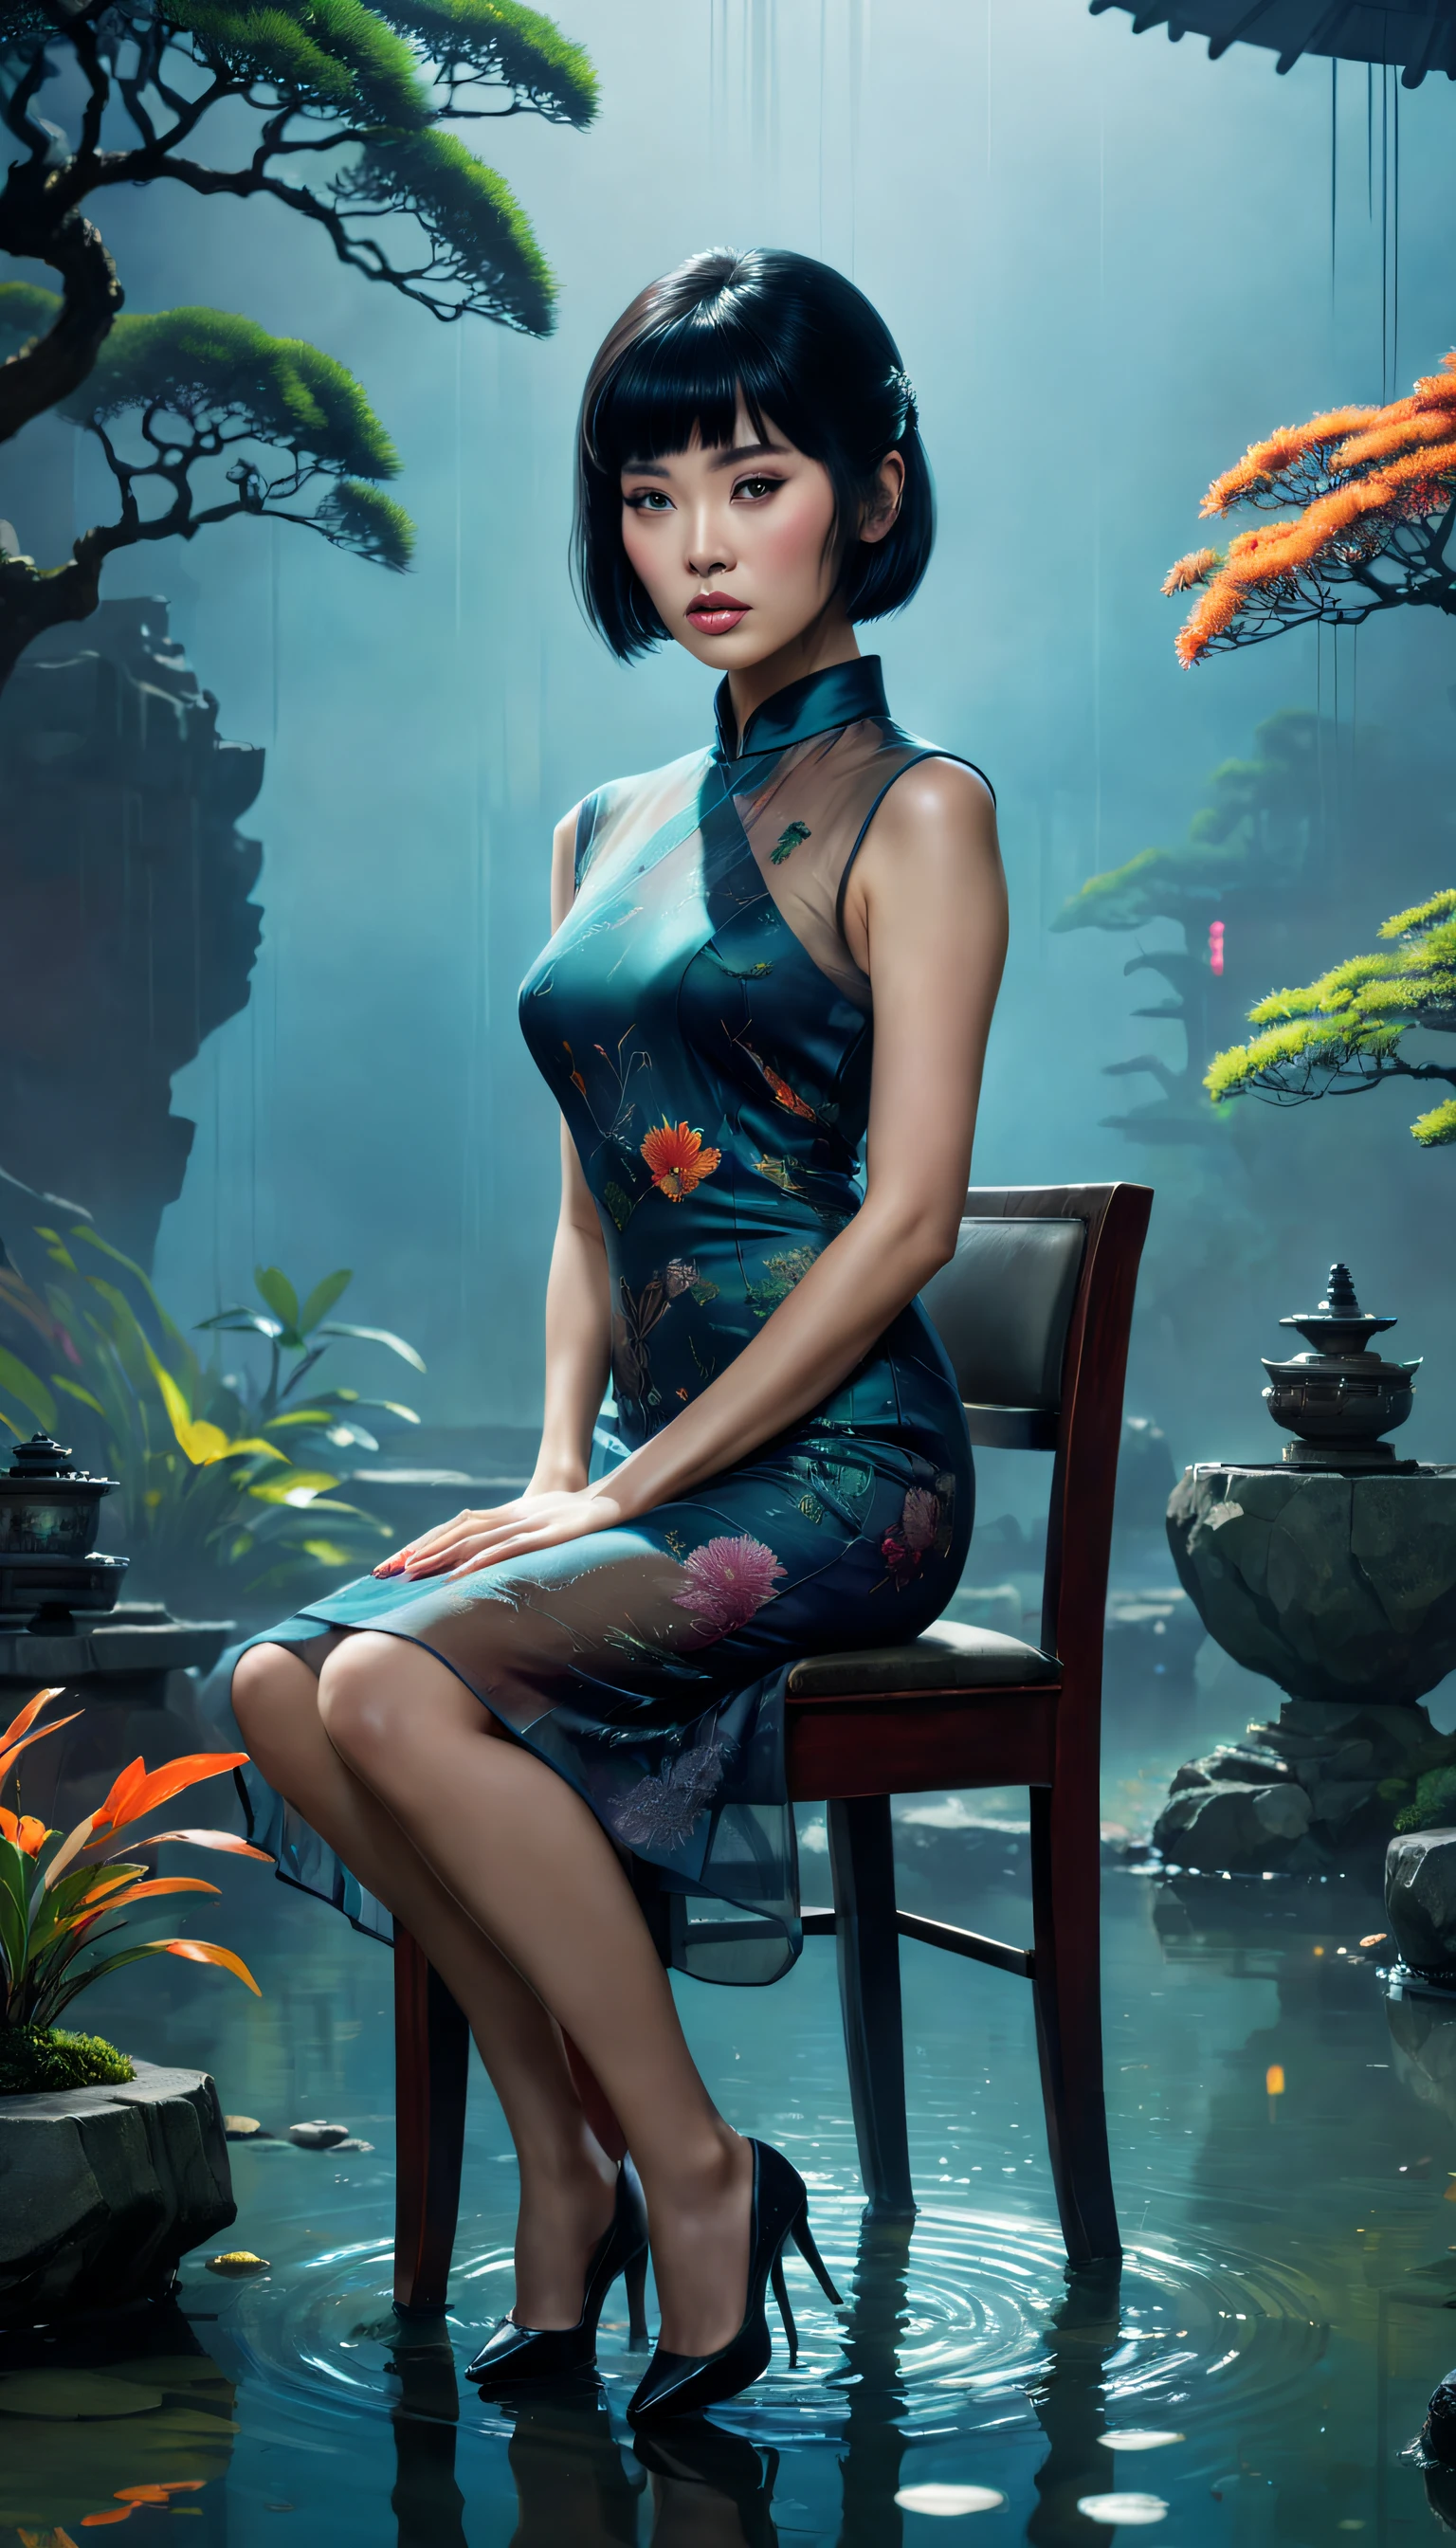 《Blade Runner 2049》(filmposter)，Anna Sterling, Thin sheer cheongsam dress, Black hair, sit on chair,Rock garden and pond, Bonsai。intricately details, Fine details, ultra - detailed, Ray traching, Subsurface scattering, diffused soft lighting, Shallow depth of field, Intricate, High detail, Sharp focus, Dramatic, photorealistic painting art by greg rutkowski